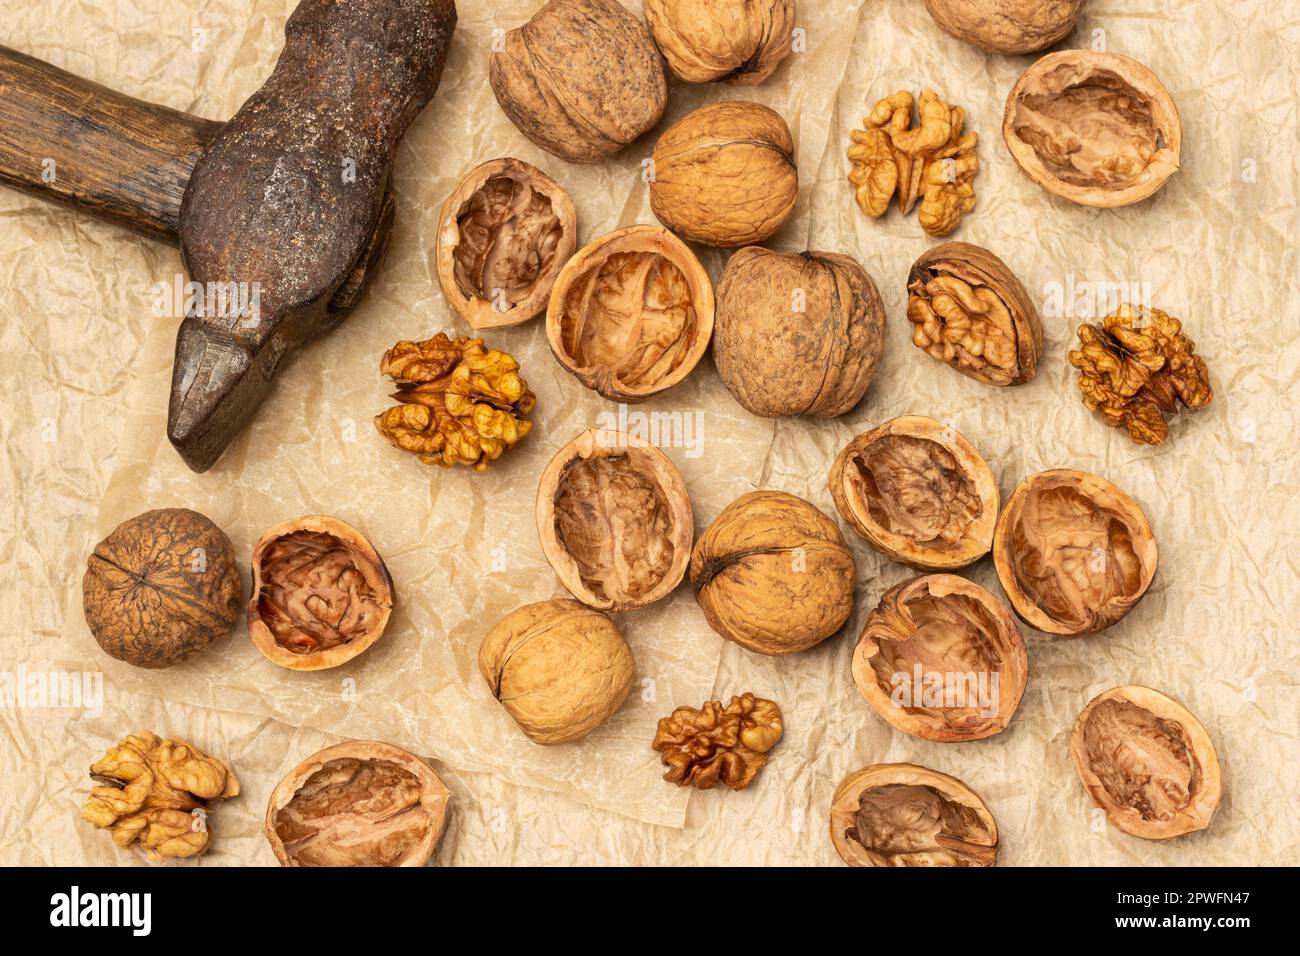 Old rusty hammer and cracked walnuts. Shells, nut kernels and whole nuts on crumpled paper. Flat lay Stock Photo